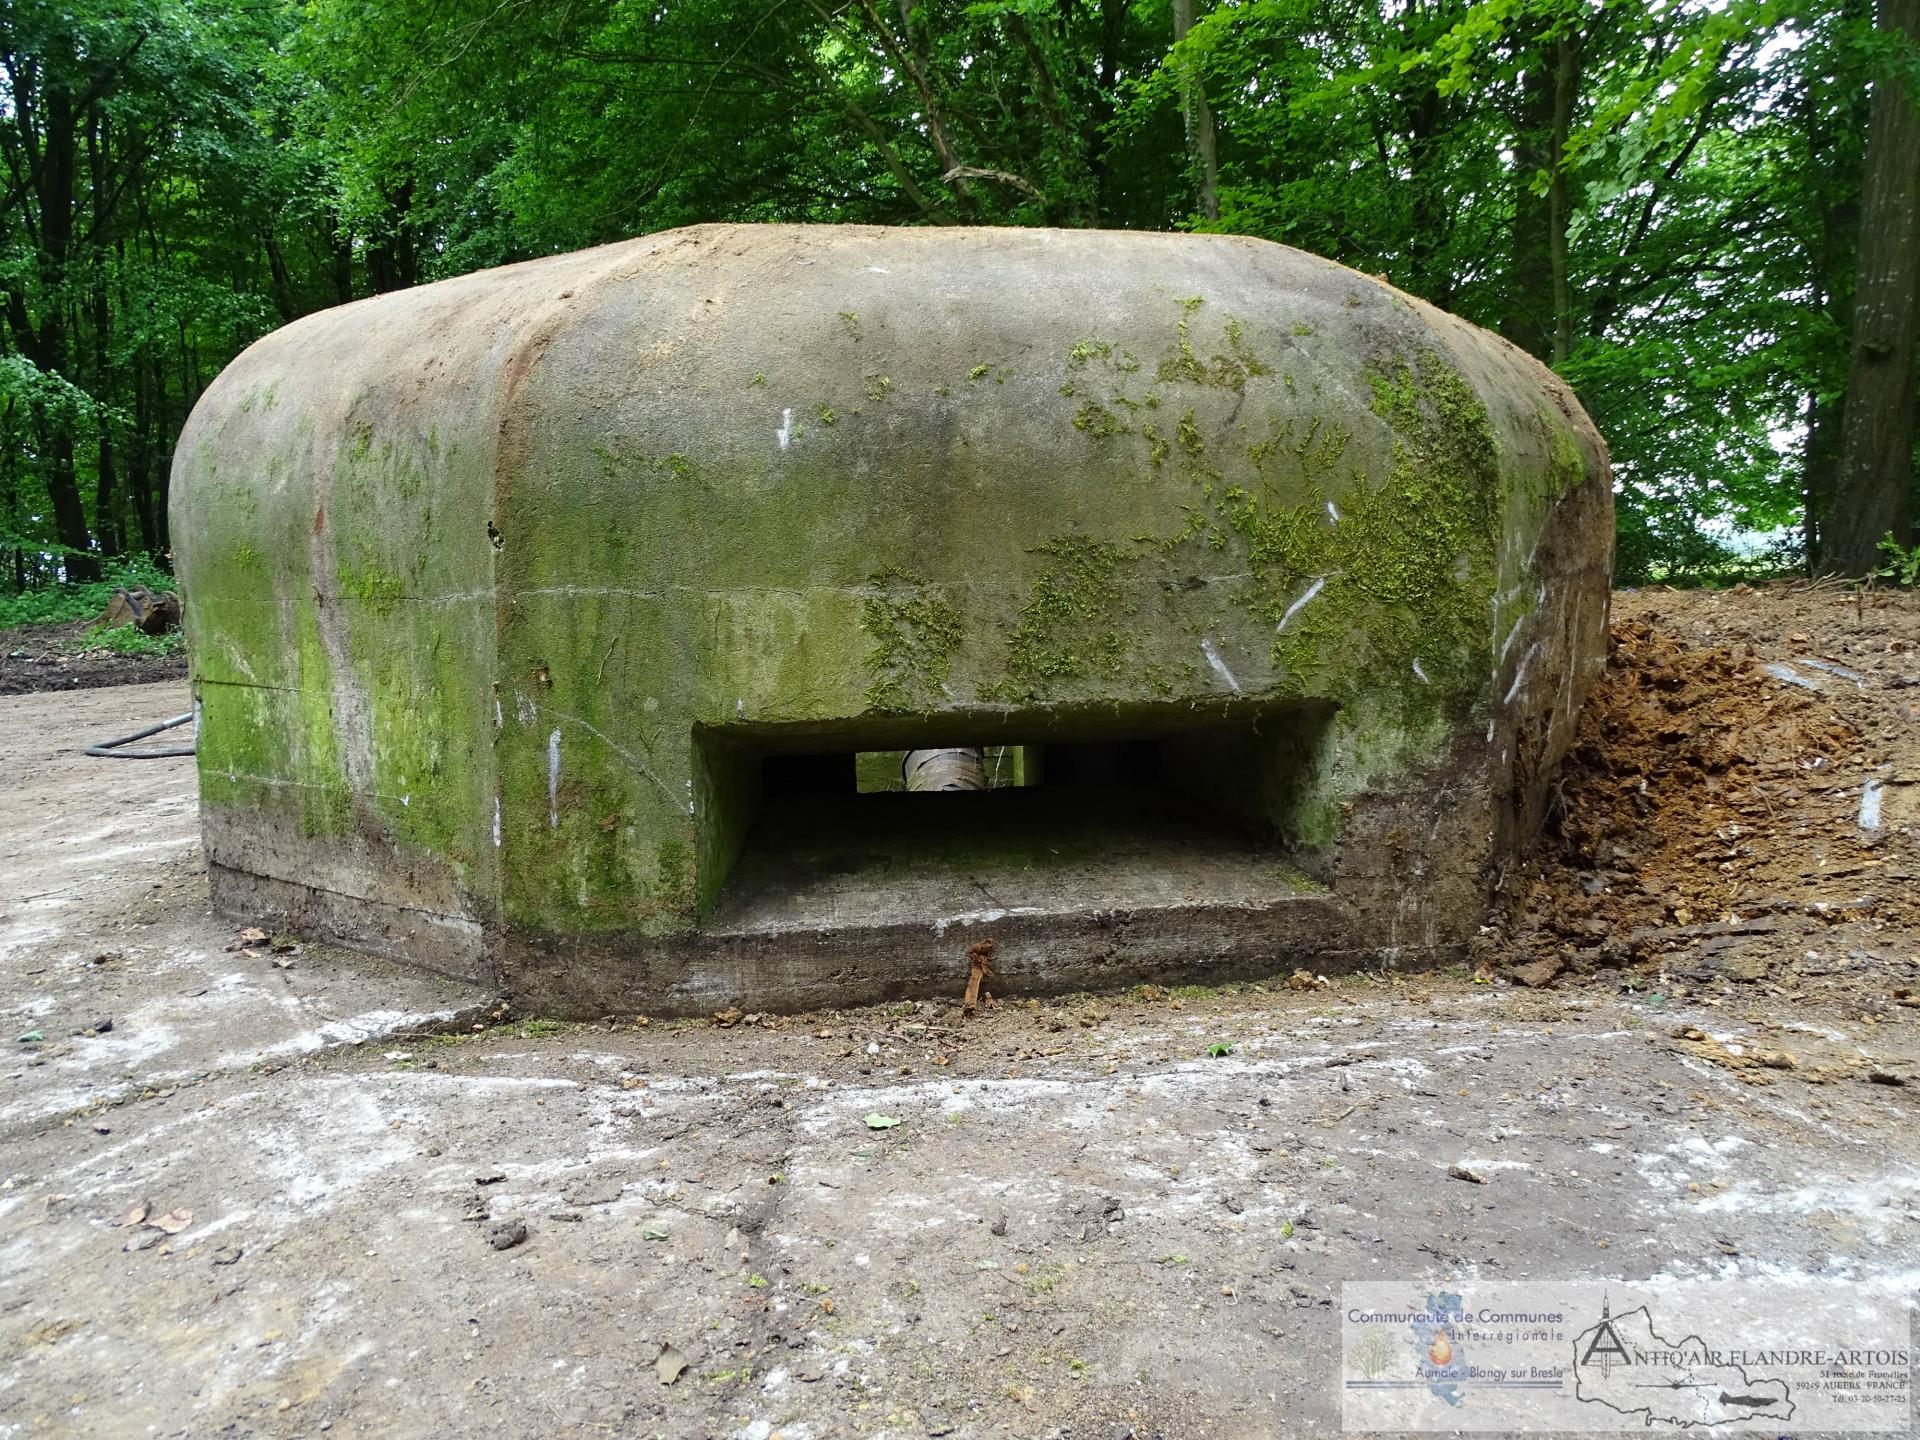 The firing bunker once the works done